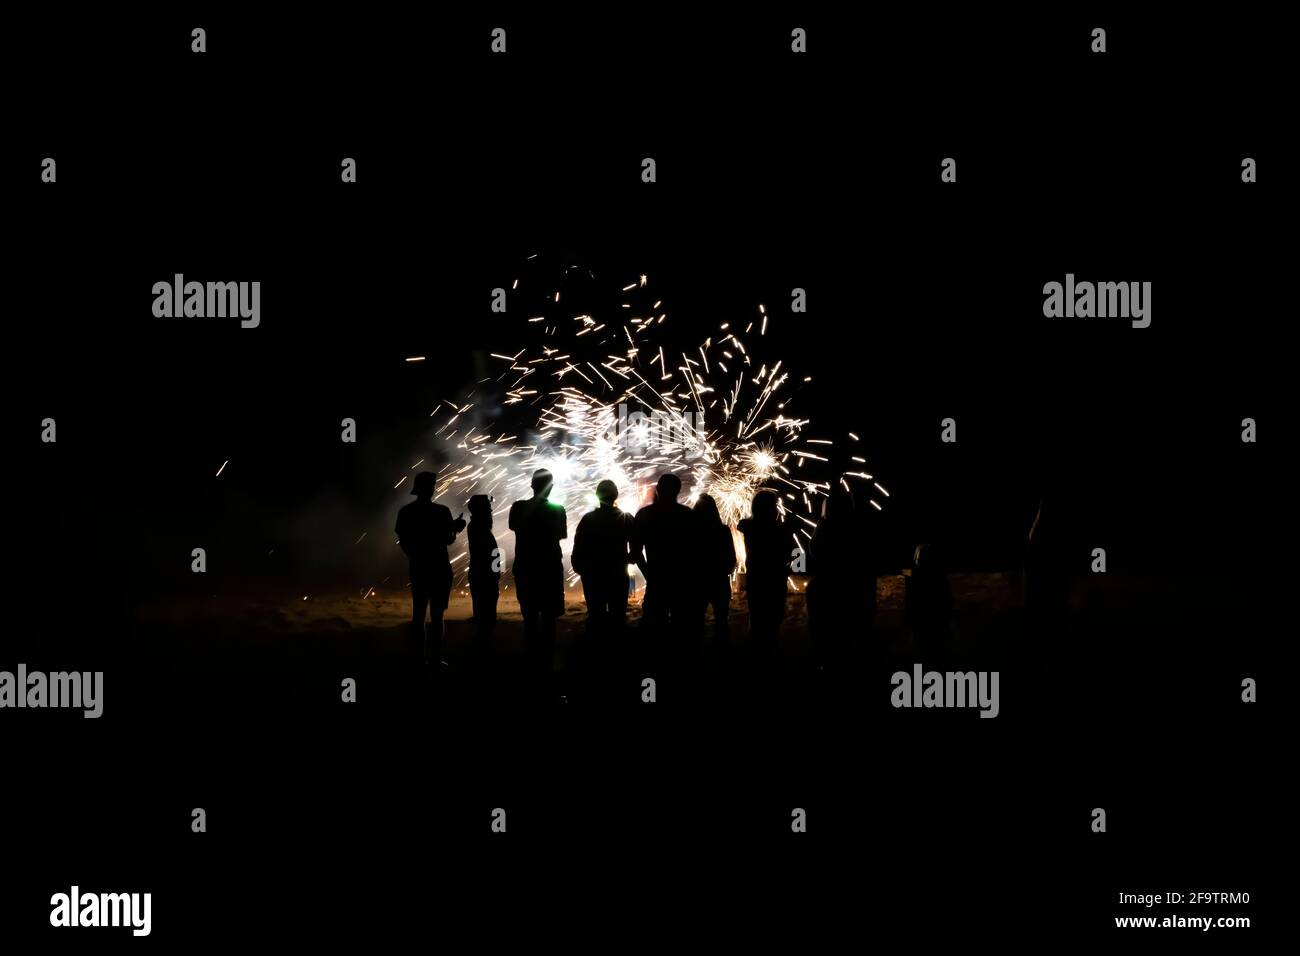 Group of people in silhouette watch fireworks explode on beach in total darkness. Stock Photo